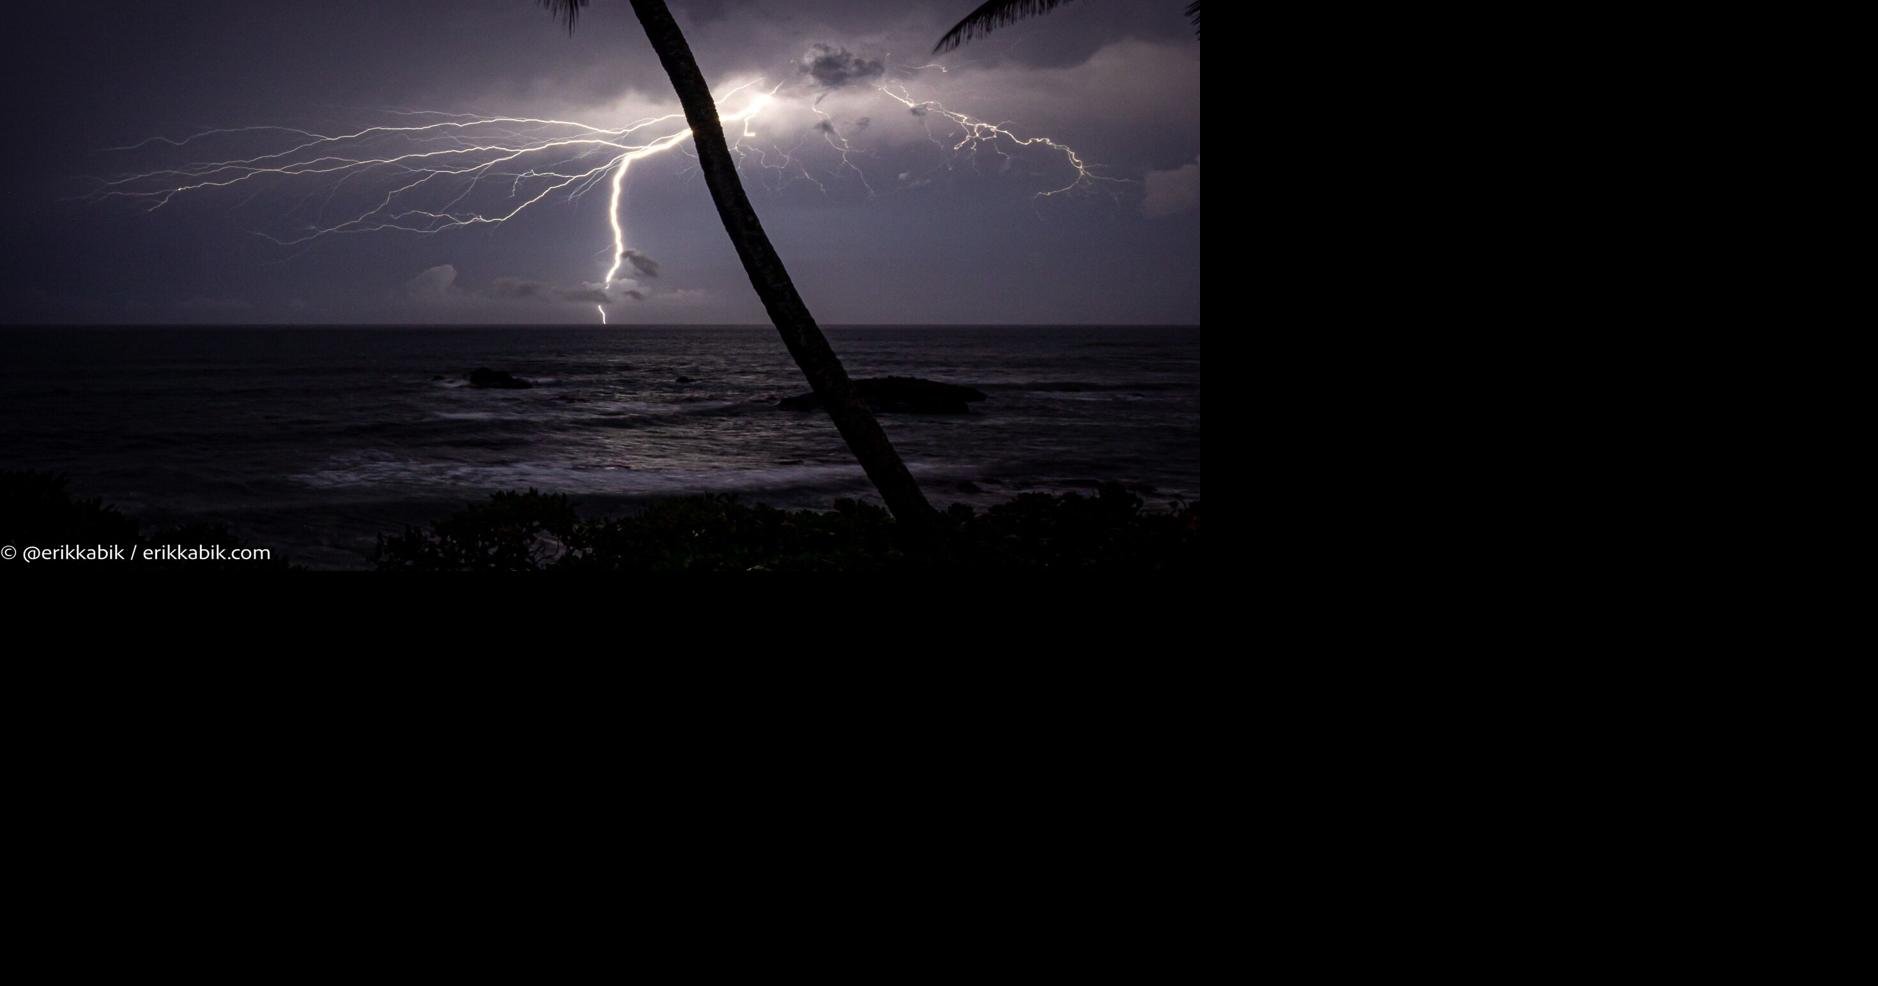 Hail stones, 'sheet lightning' provide for rare weather display on Oahu |  Local 